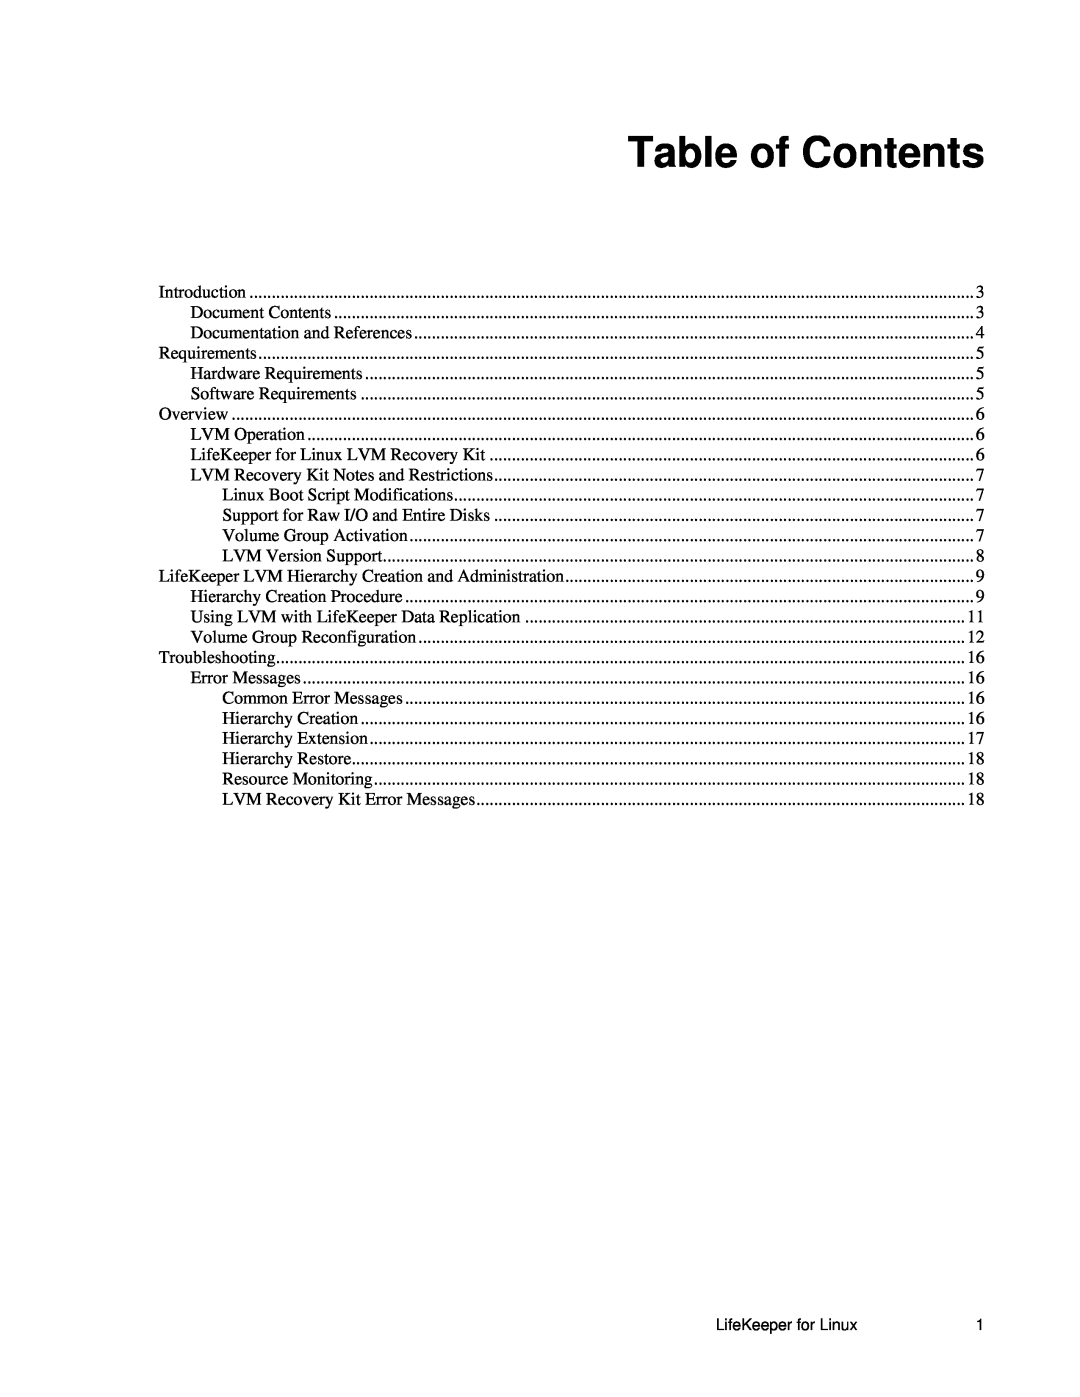 SteelEye 4.5.0 manual Table of Contents 